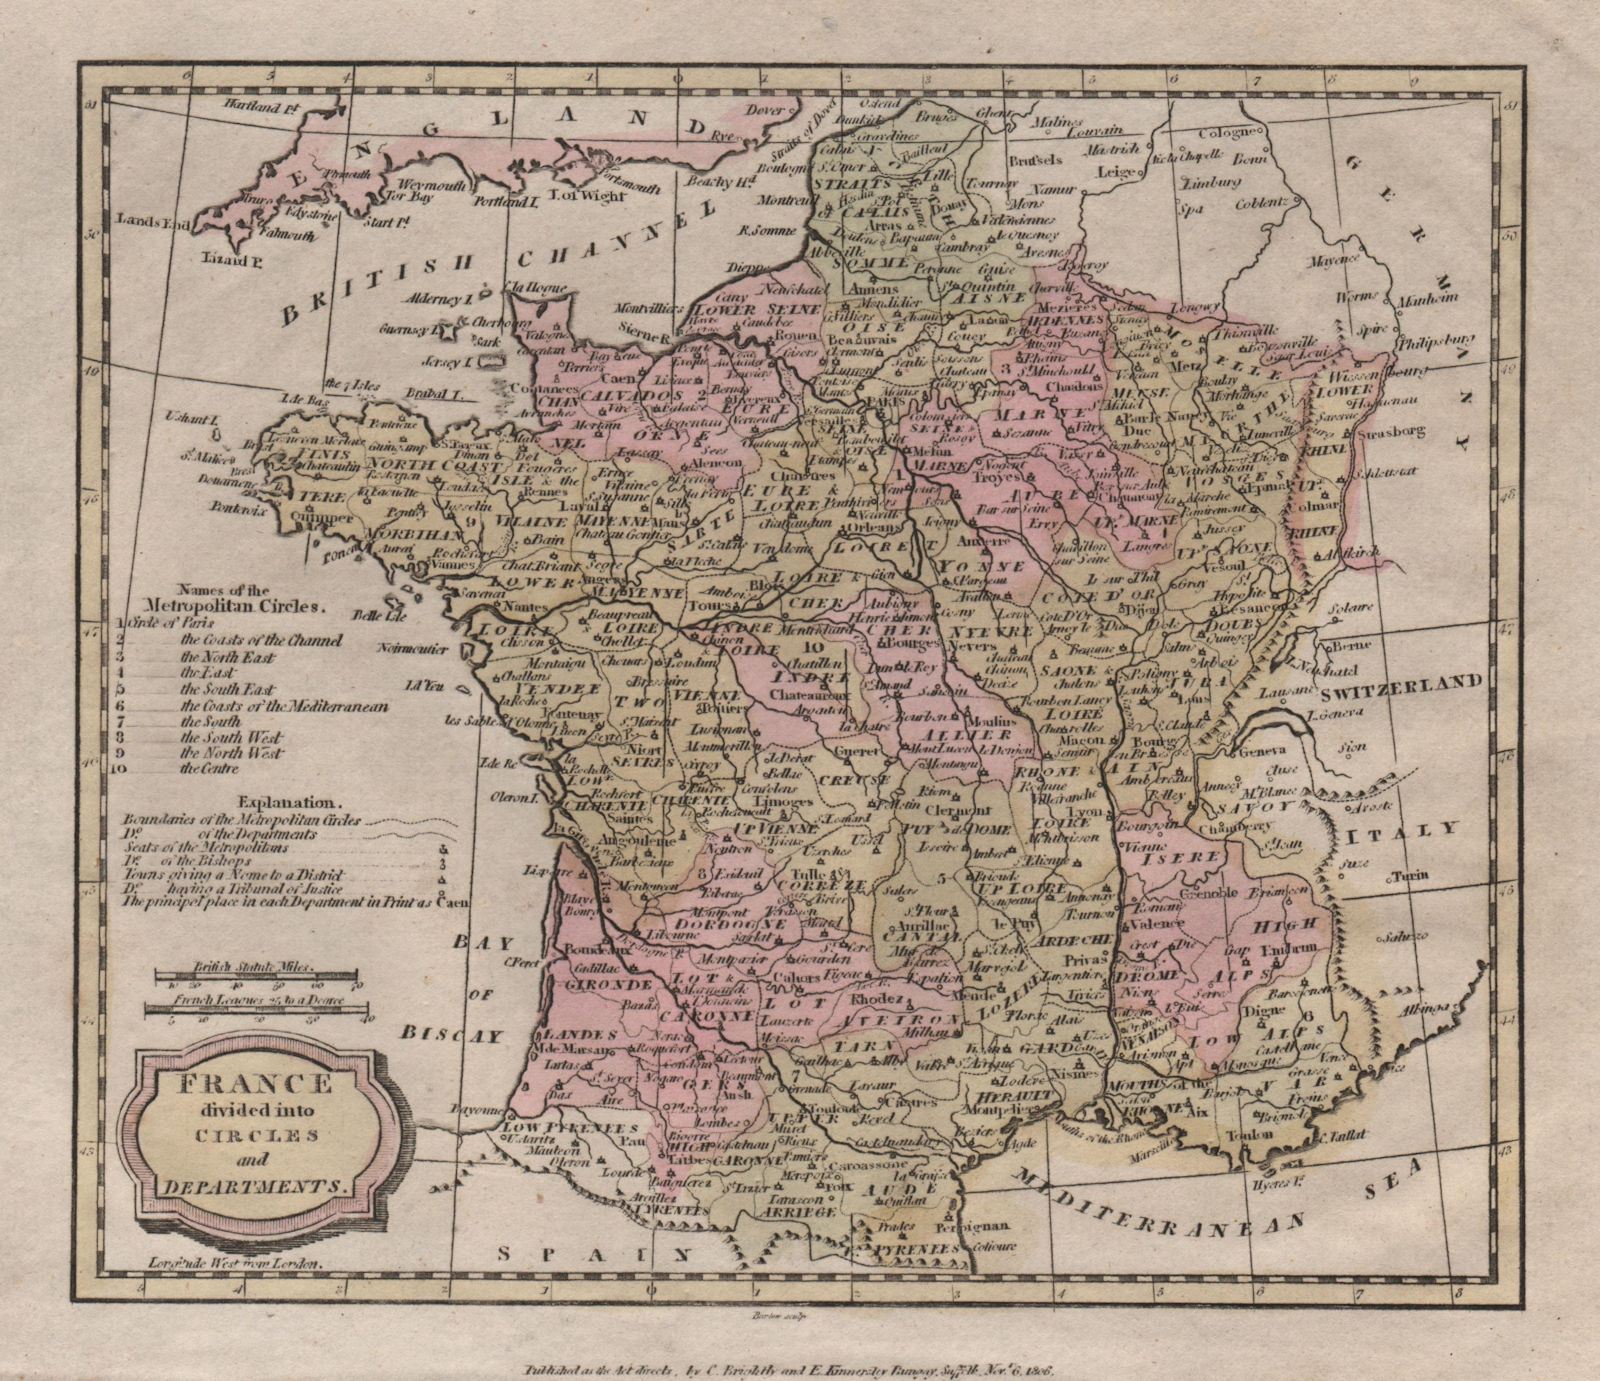 Associate Product France divided into circles and departments. BARLOW 1807 old antique map chart